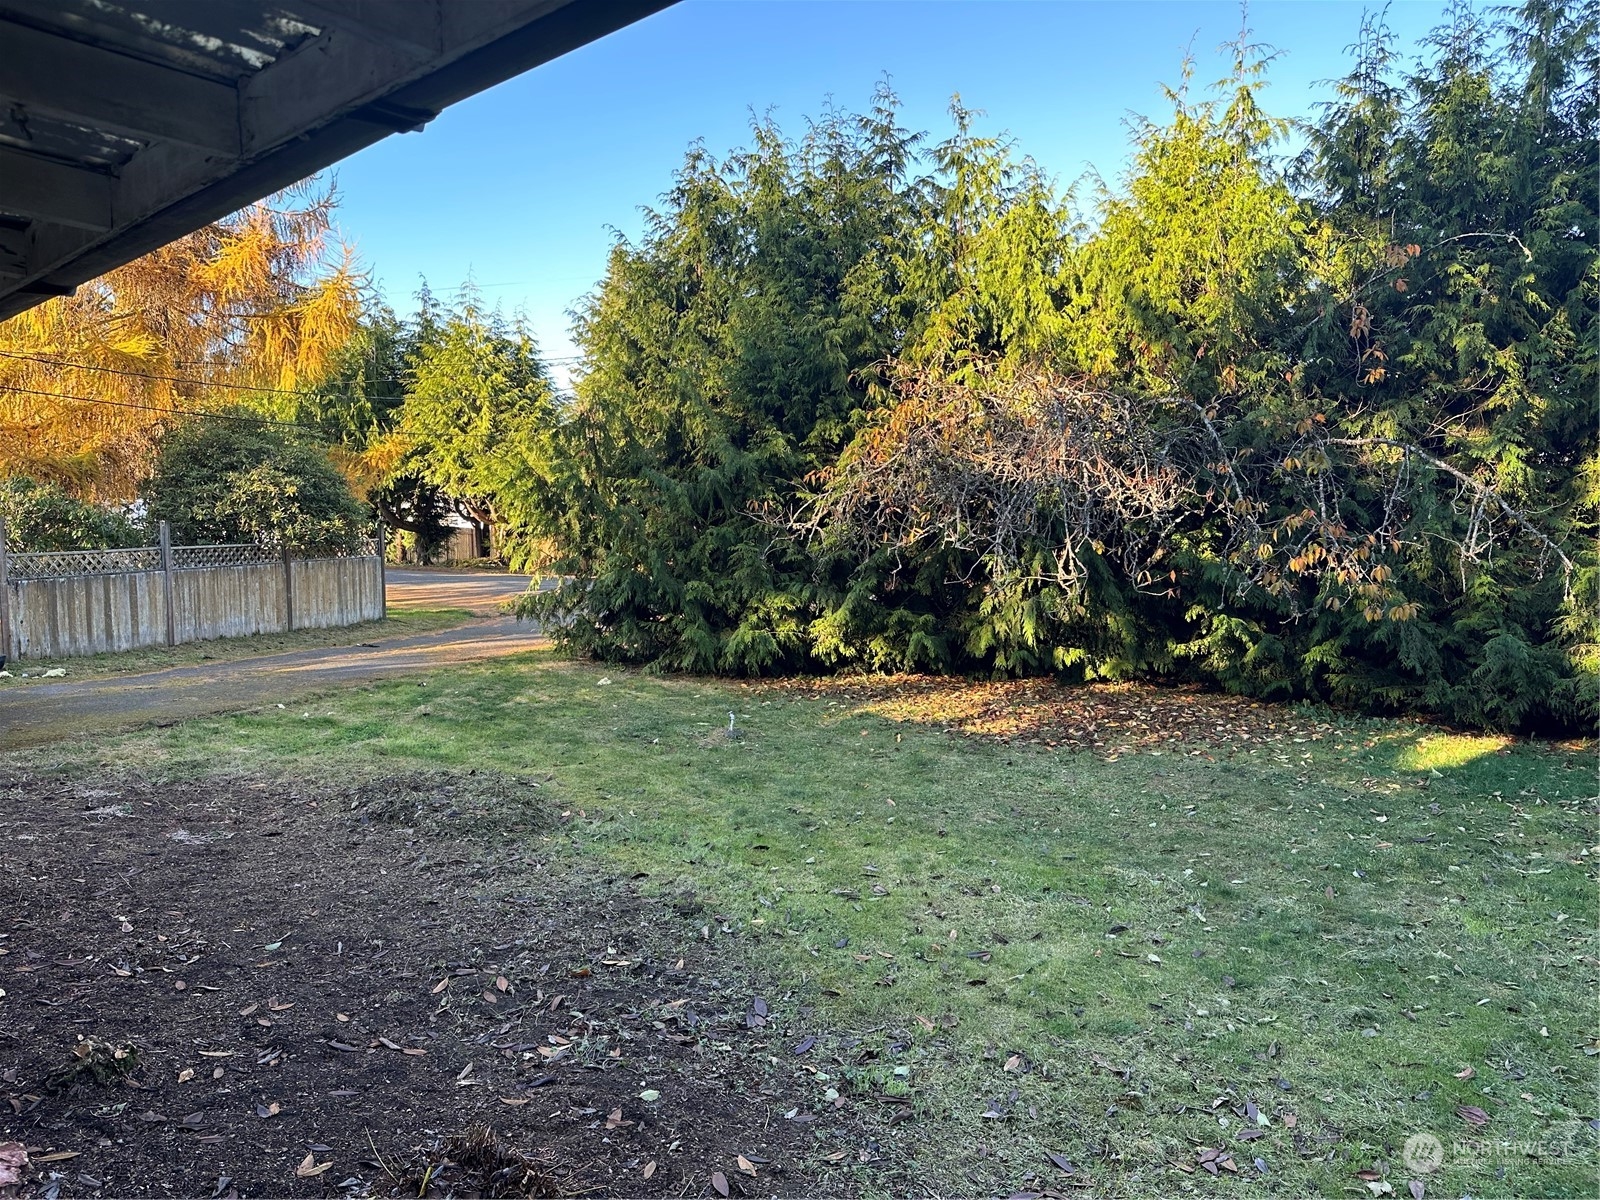 a view of a backyard with tree